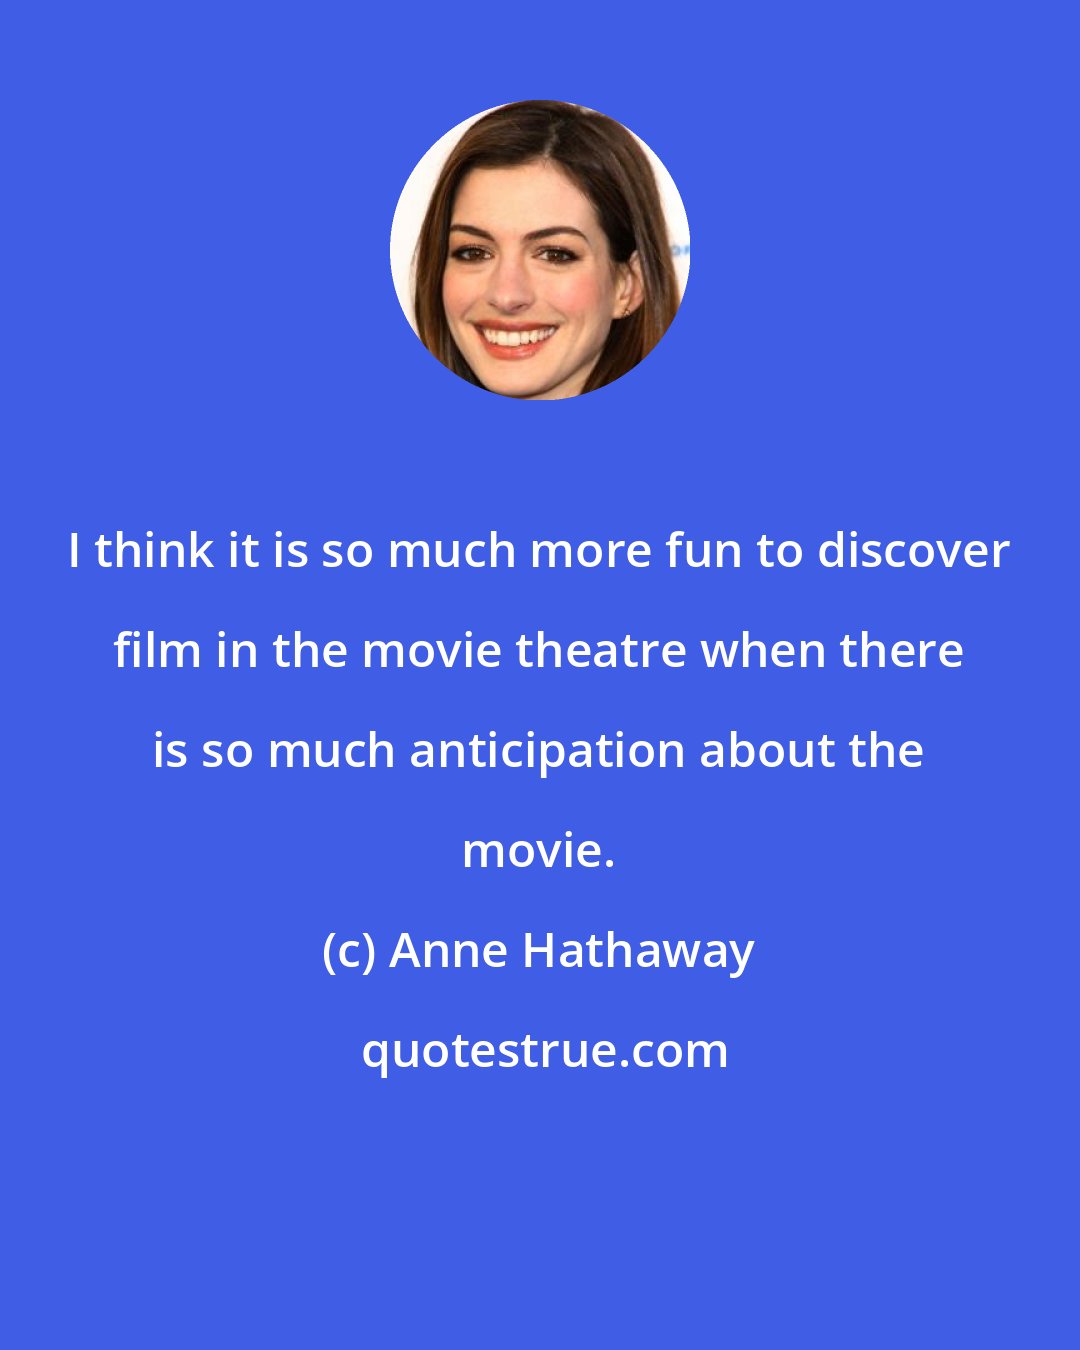 Anne Hathaway: I think it is so much more fun to discover film in the movie theatre when there is so much anticipation about the movie.